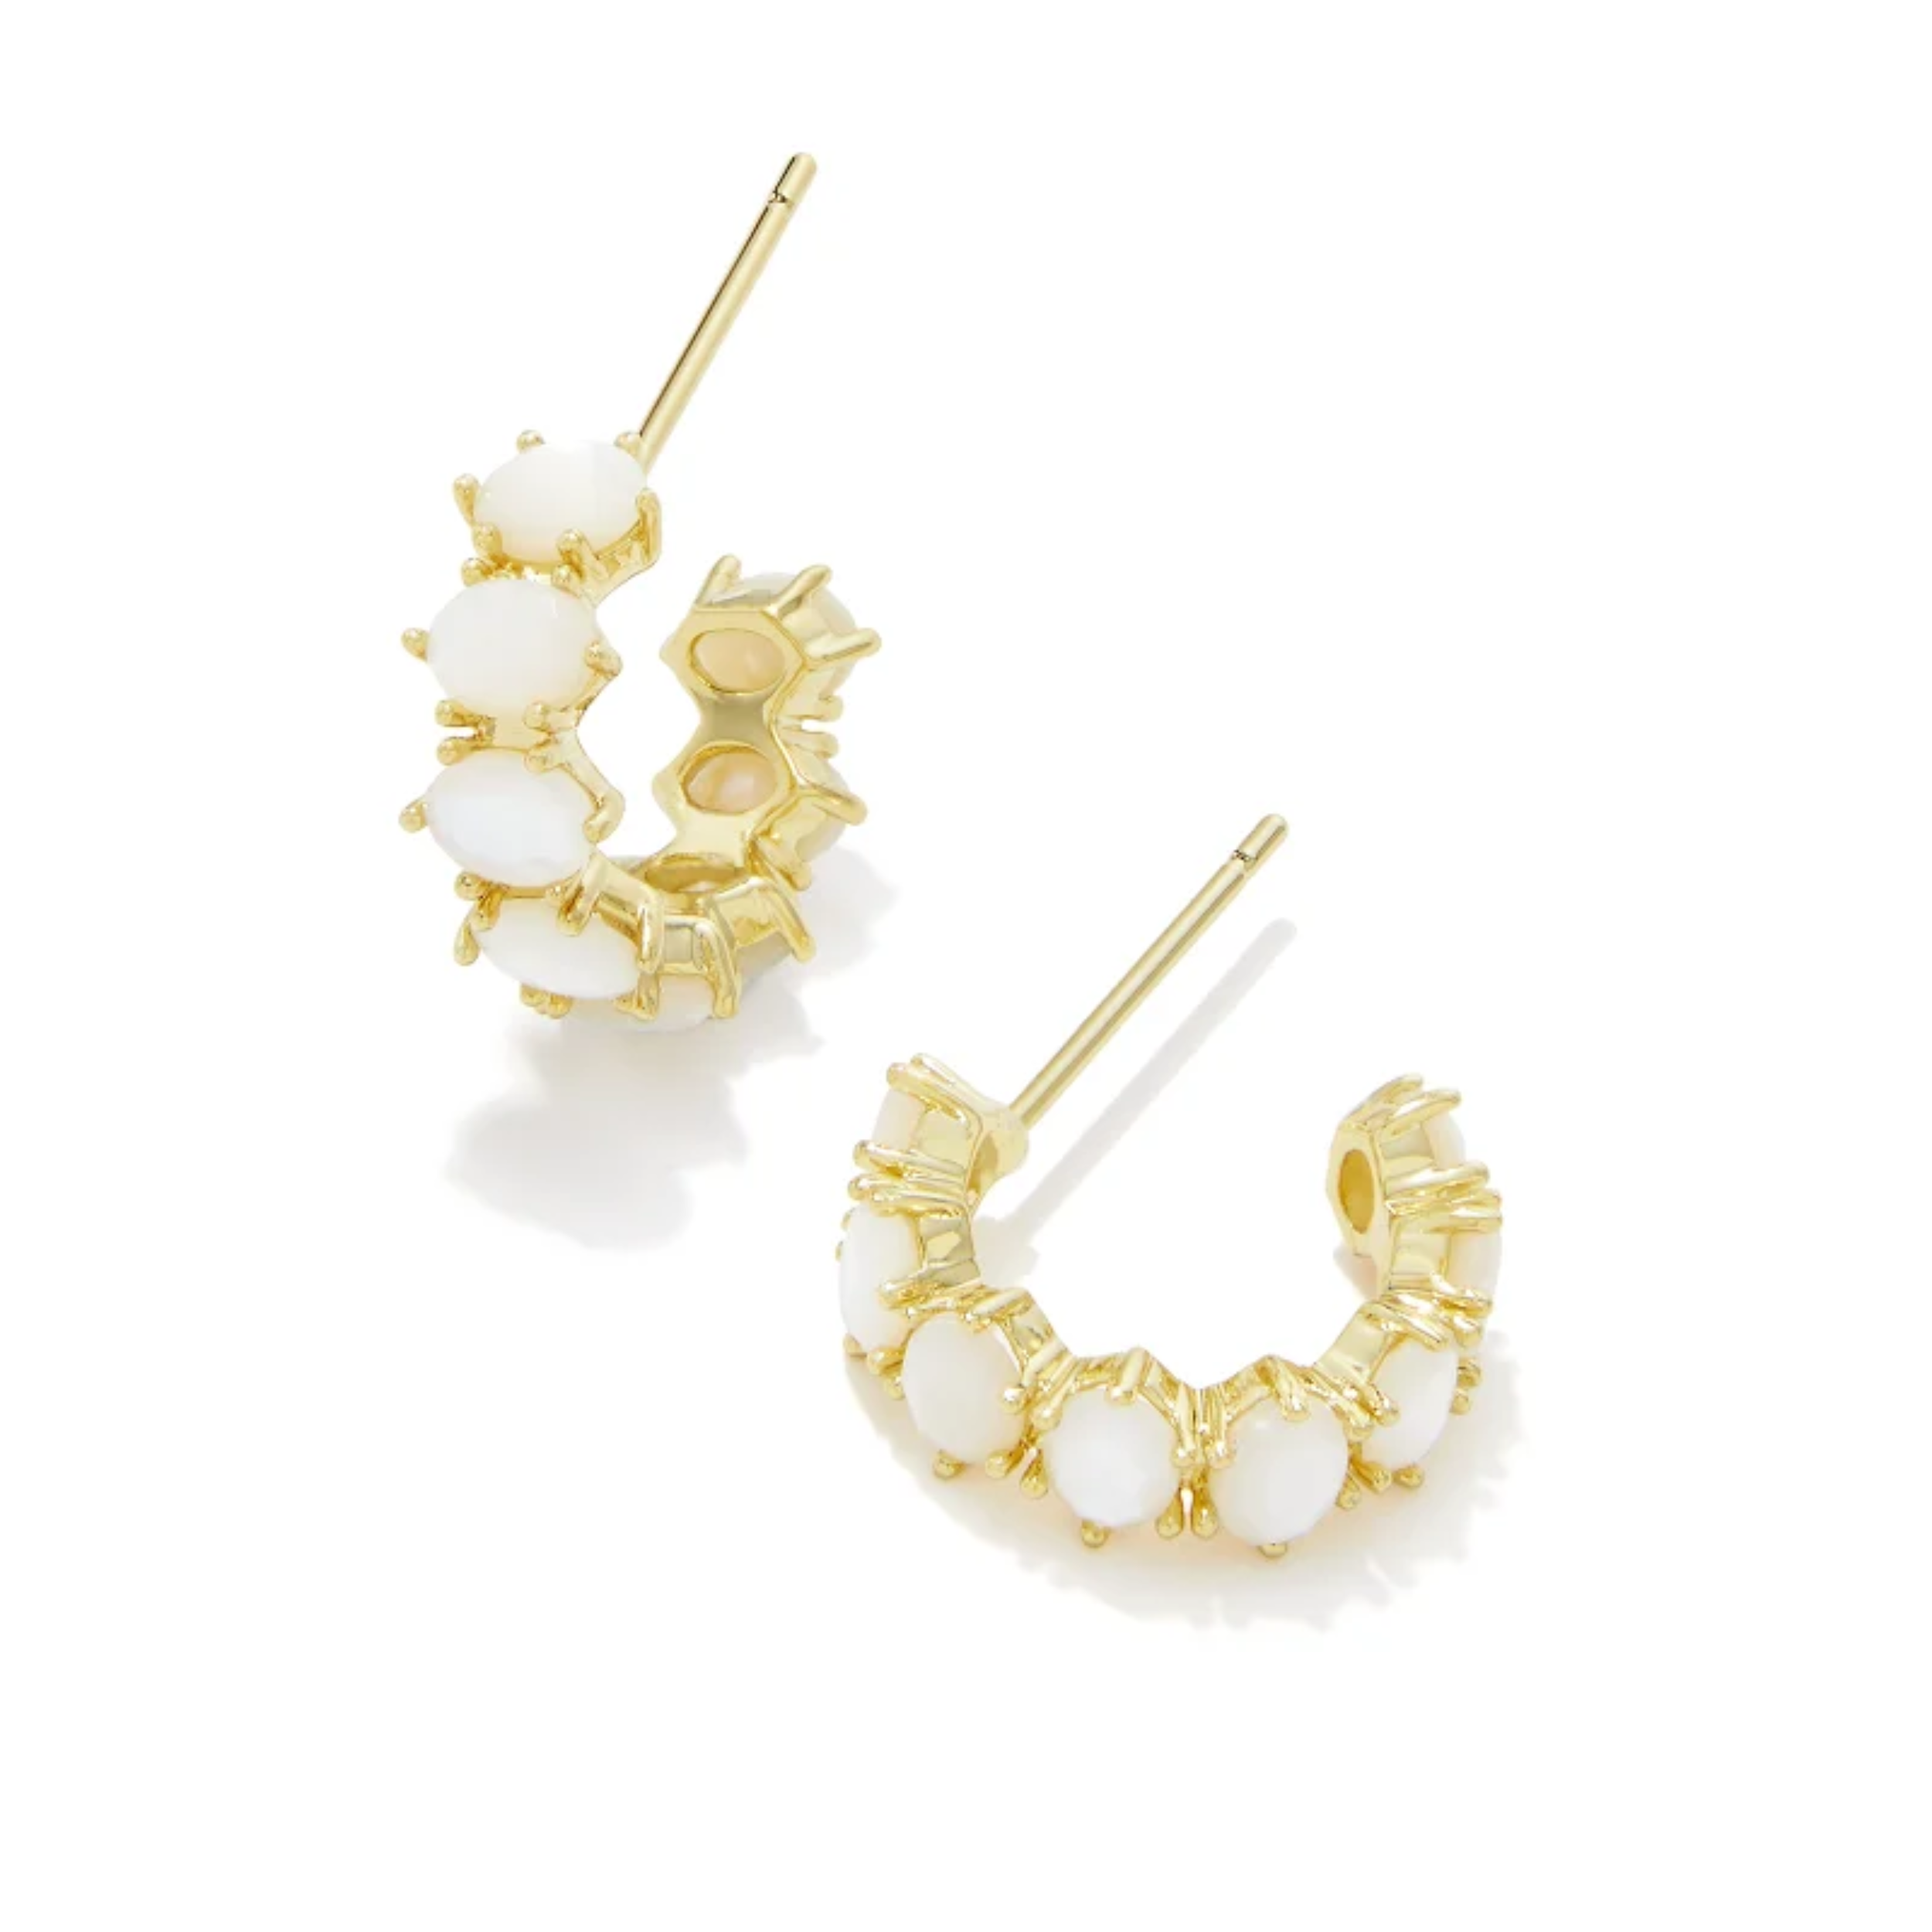 These Cailin Gold Crystal Huggie Earrings in Ivory Mother-Of-Pearl by Kendra Scott are pictured on a white background.